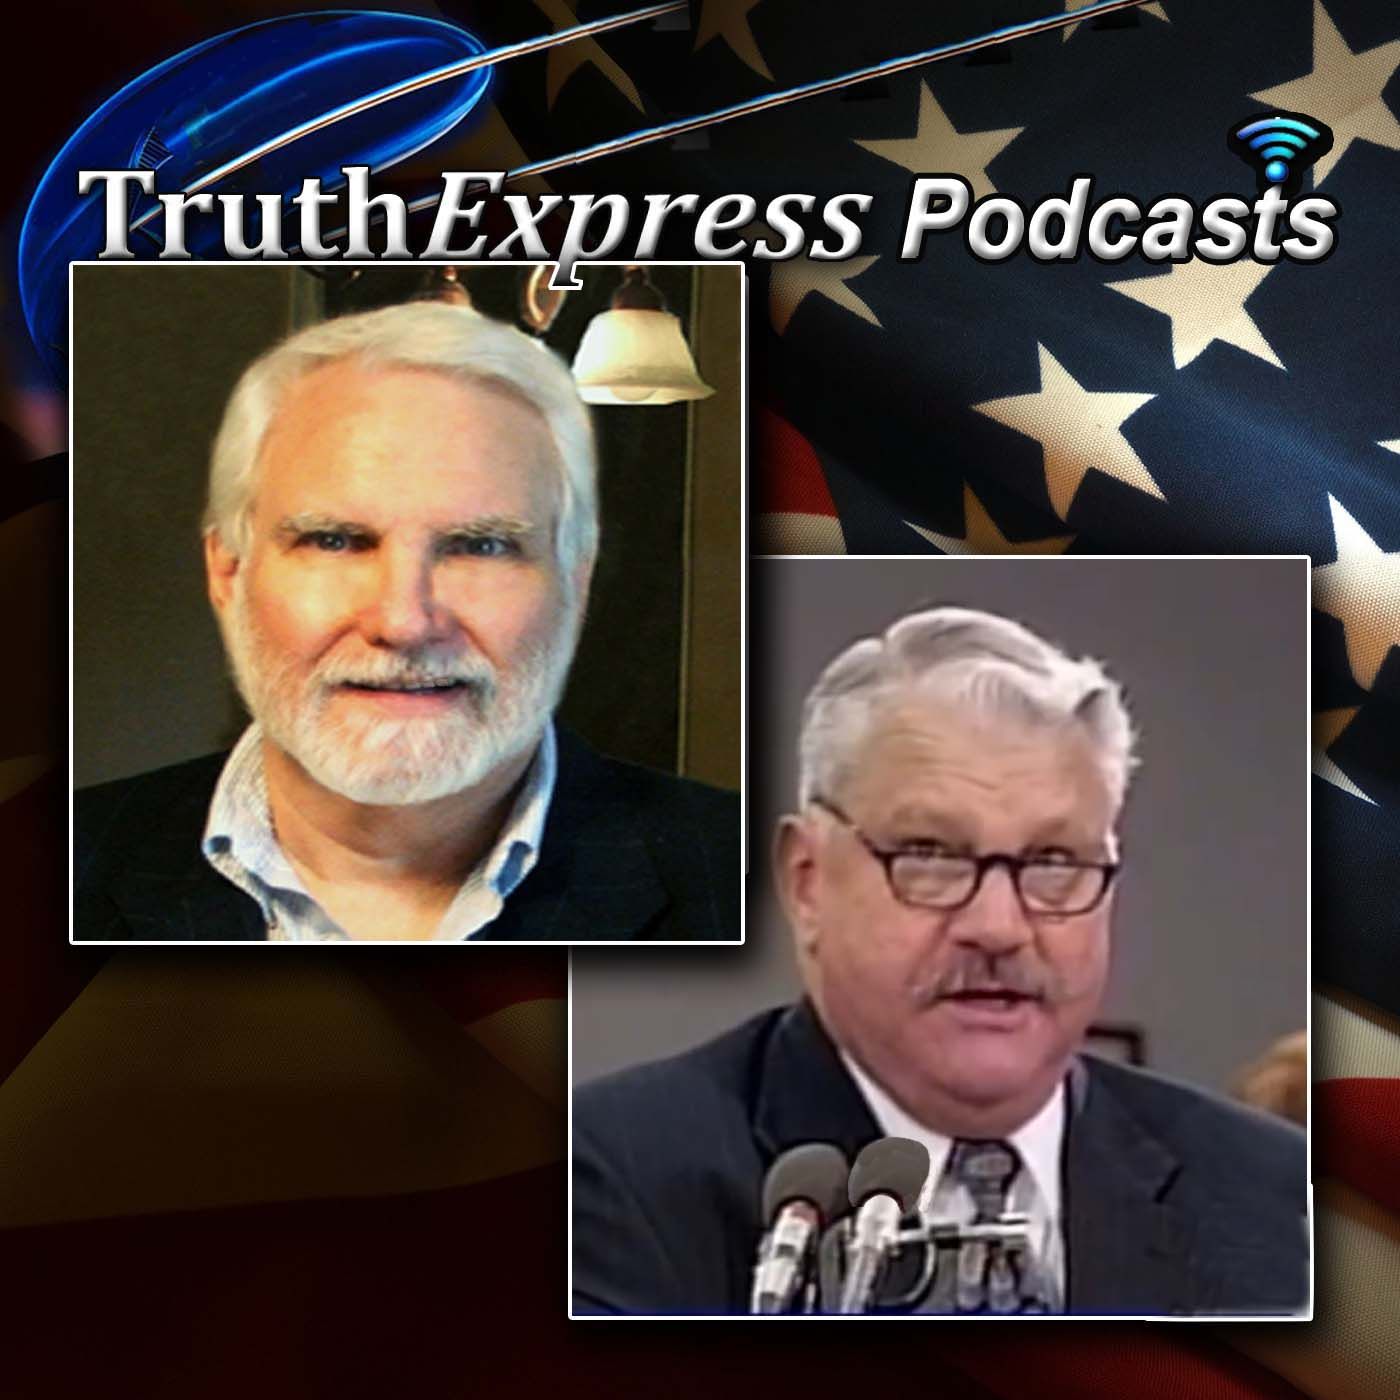 David Stoddard & Ron Boat - What’s really happening at our Southern border (ep #7-16-22)